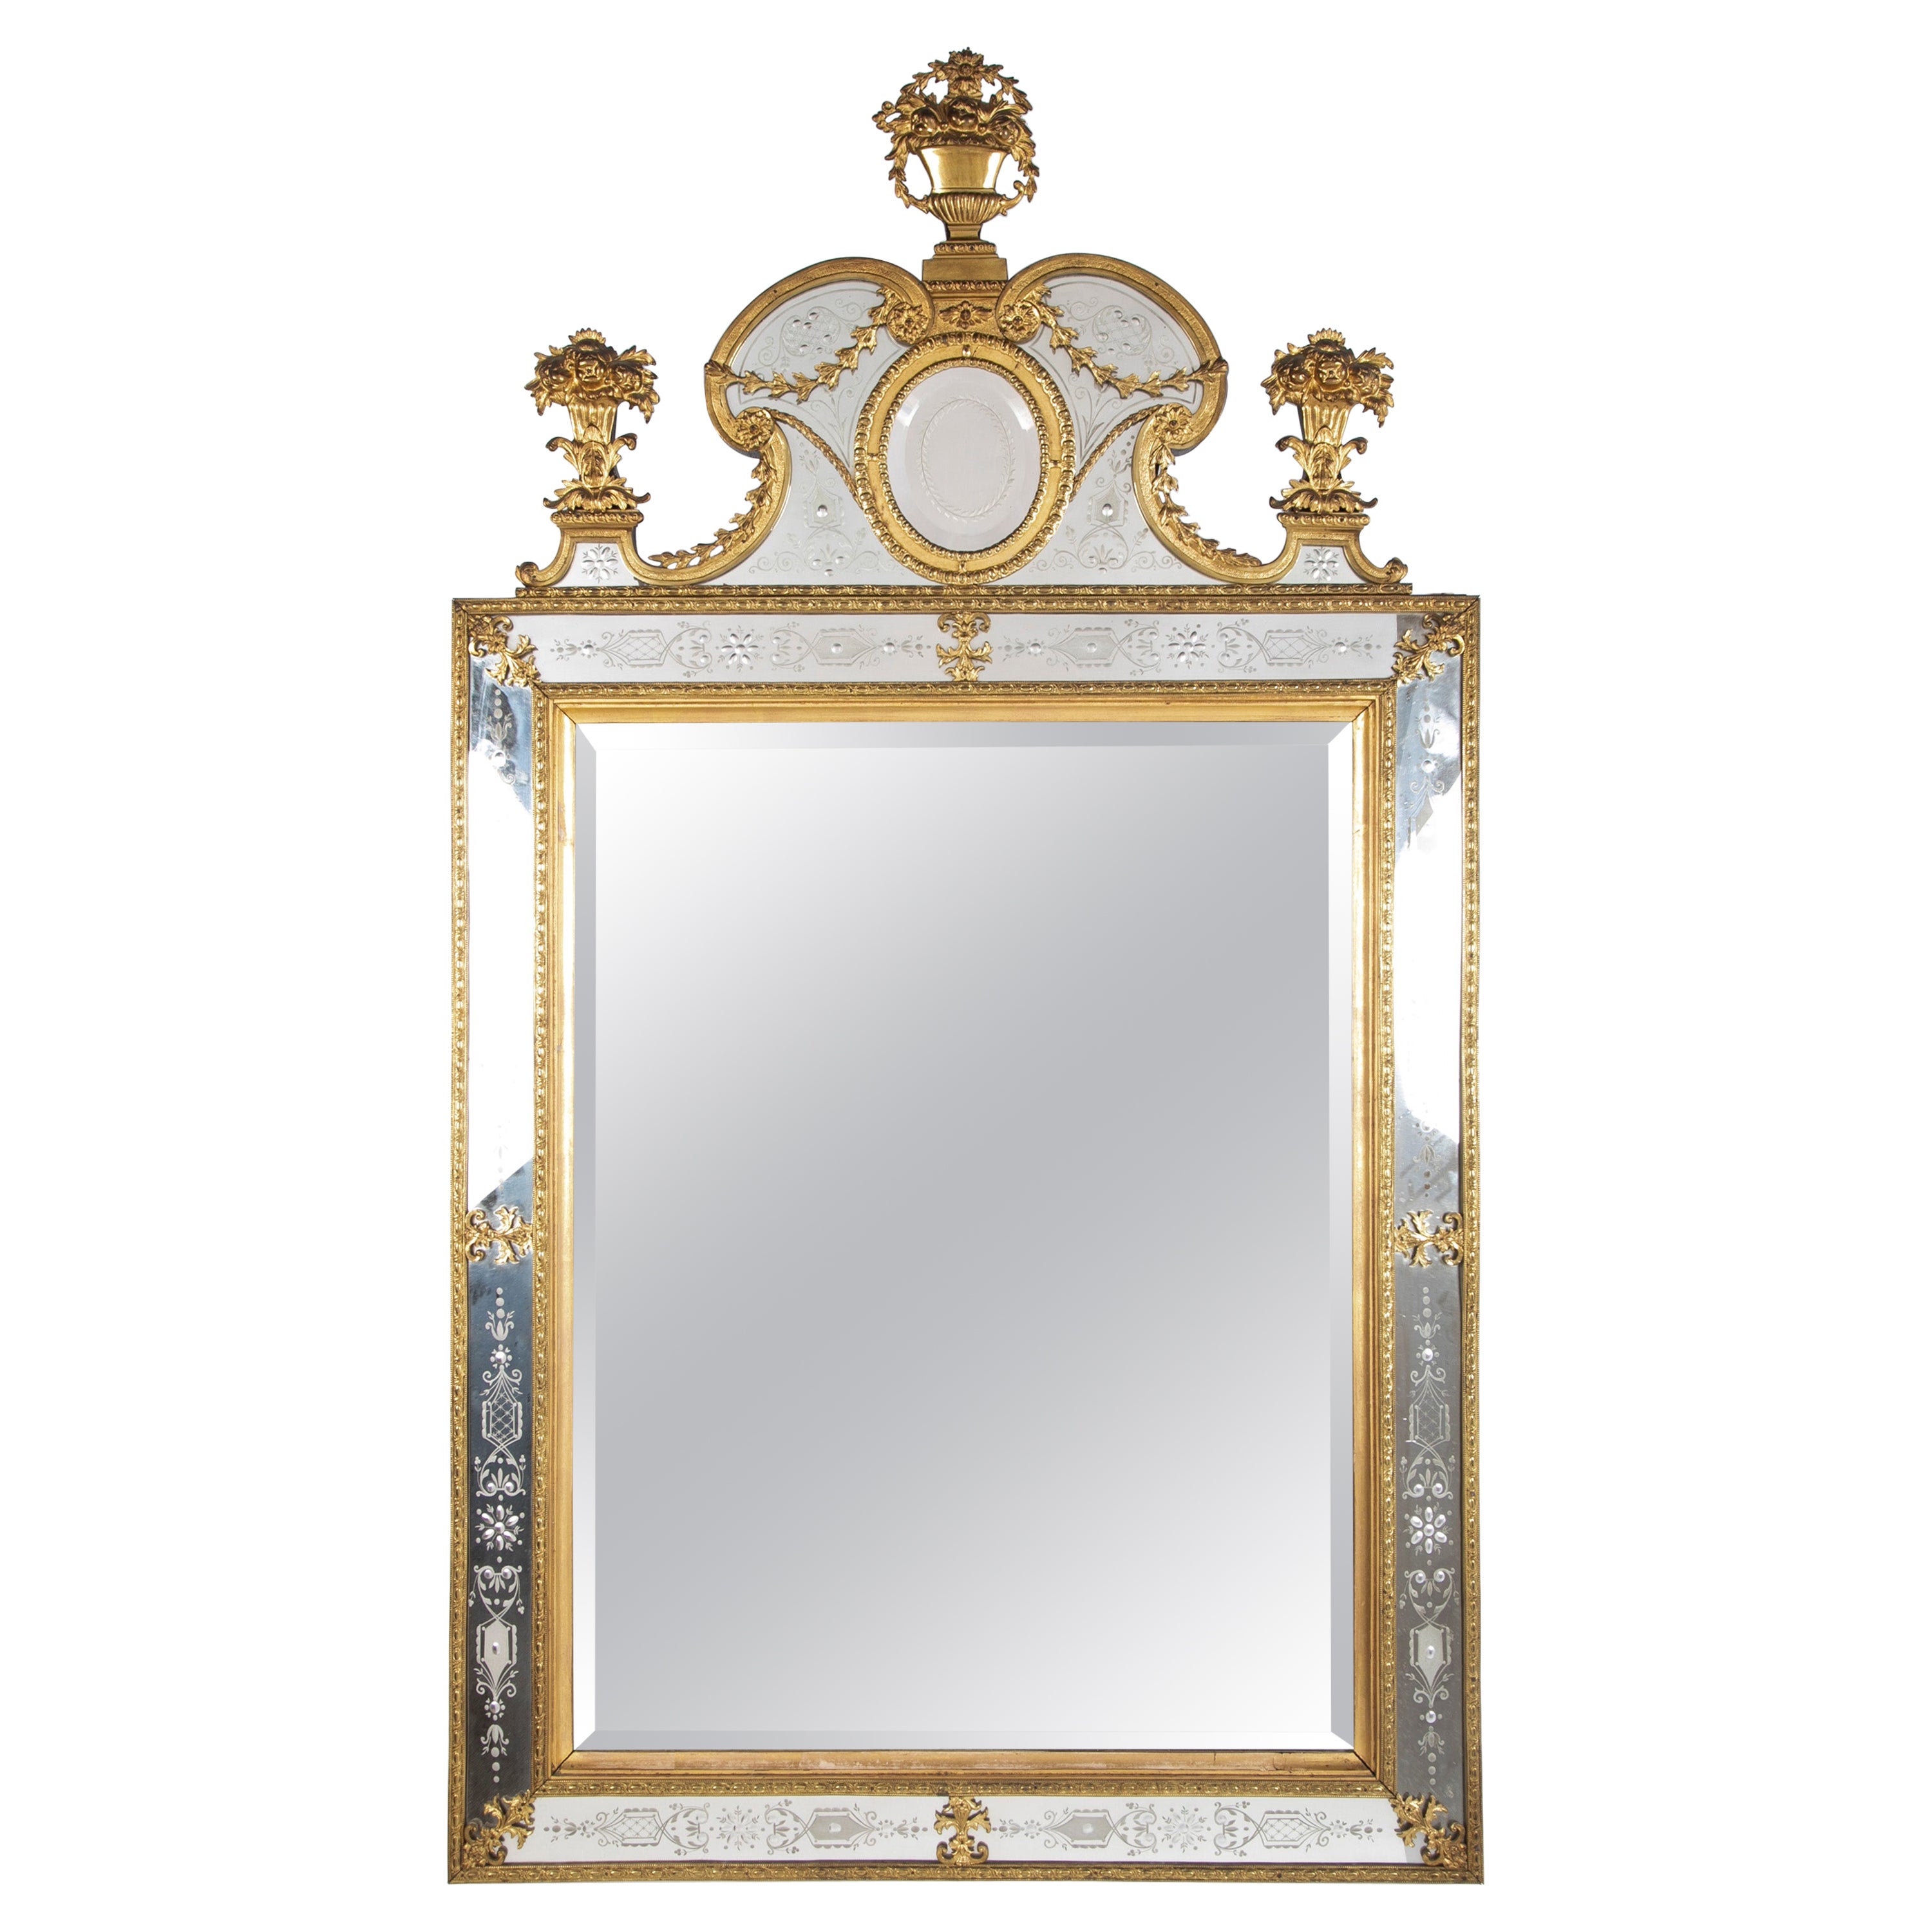 Swedish Neoclassical Ormolu and Etched Glass Mirror Designed by Burchard Precht For Sale